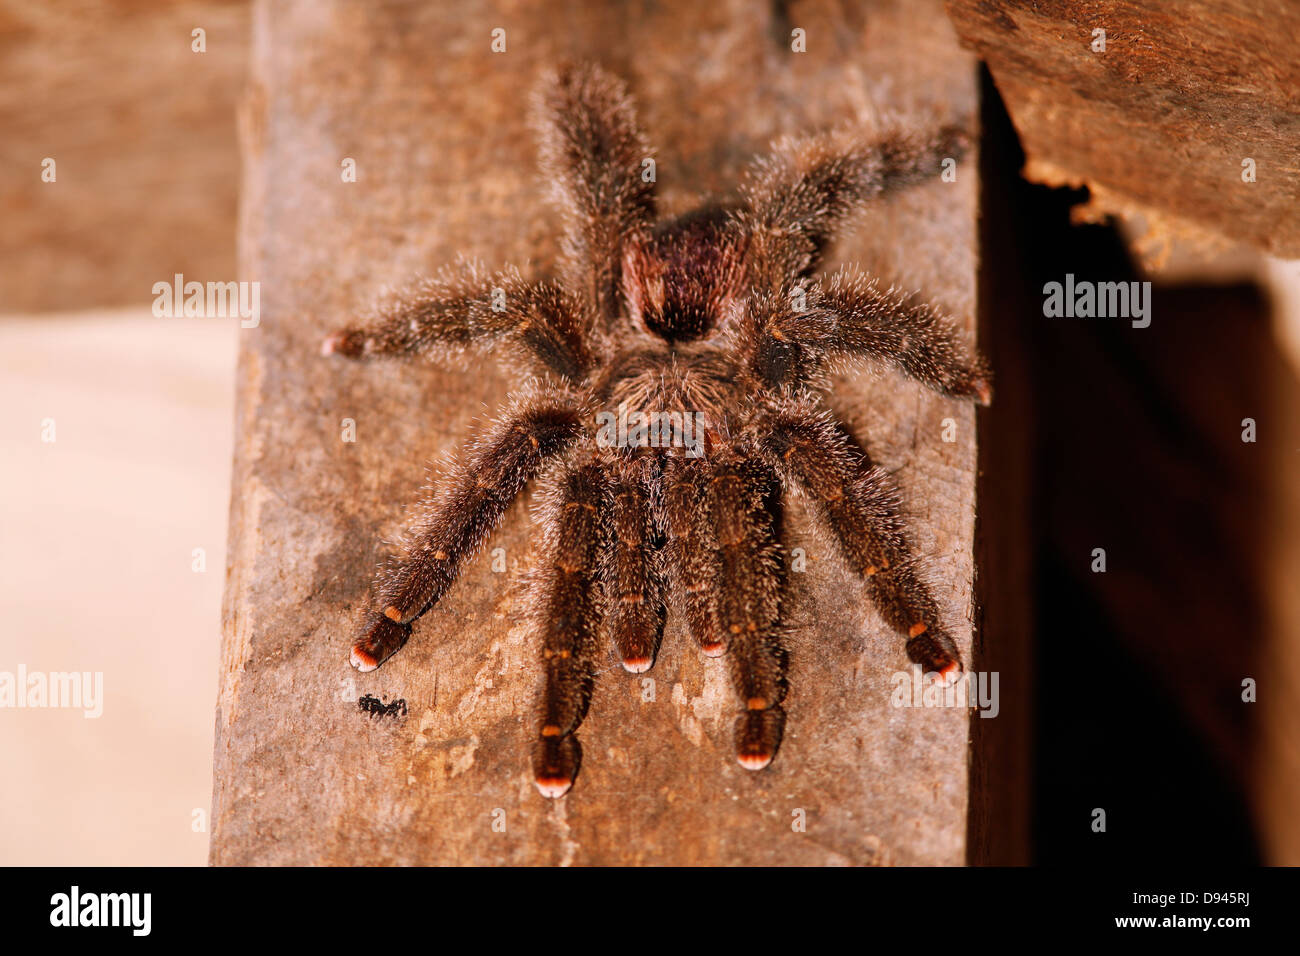 A spider, close-up. Stock Photo